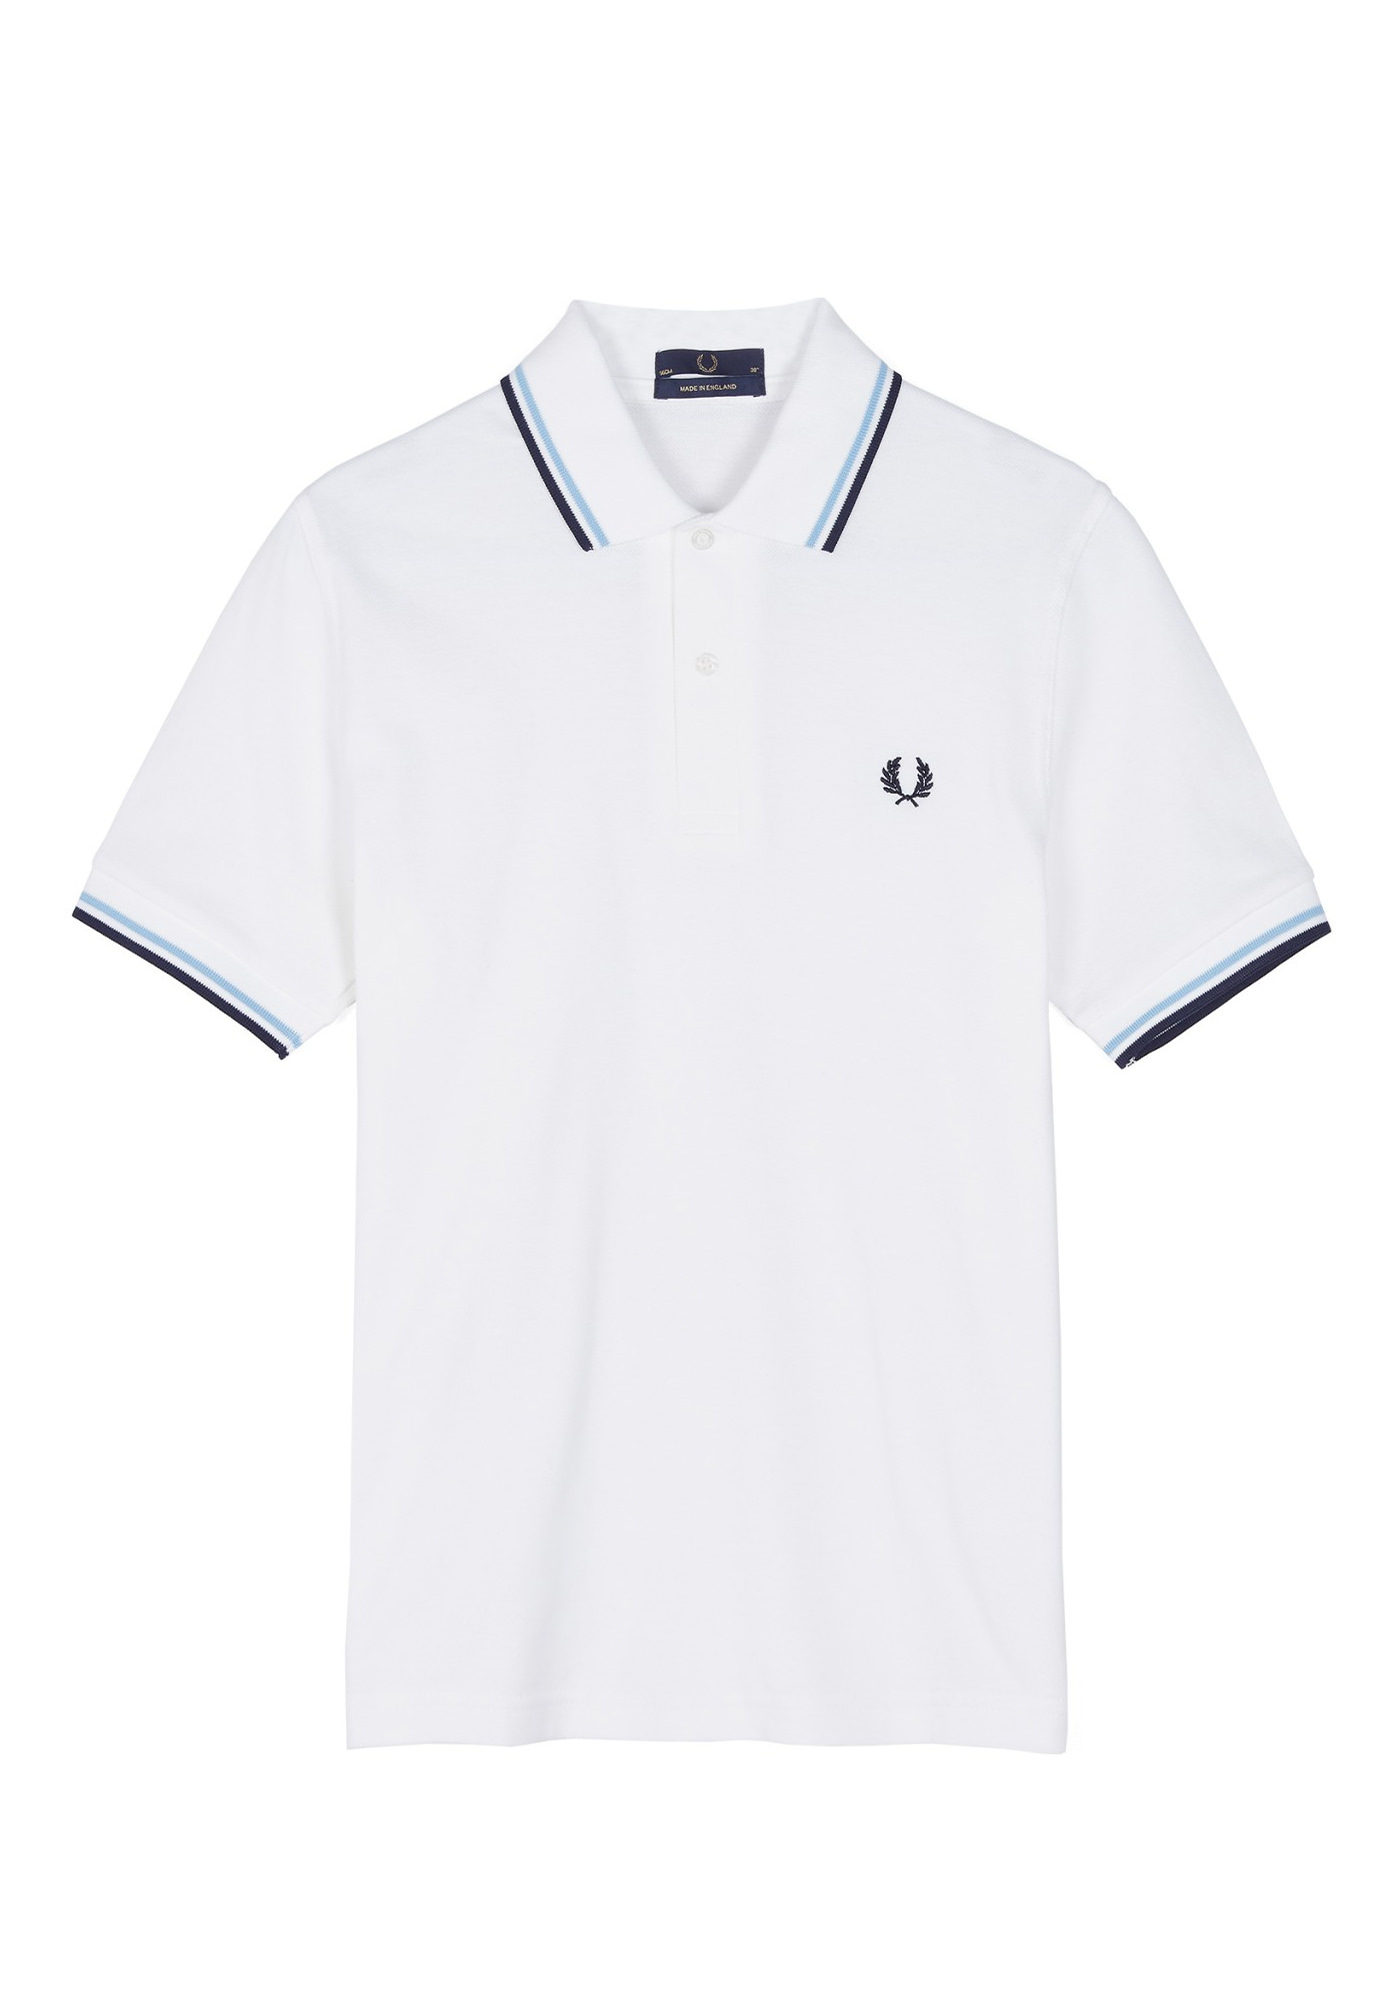 FRED PERRY SHIRT - M12 (Made in England) FRED PERRY SHIRT - M12 (Made in England)